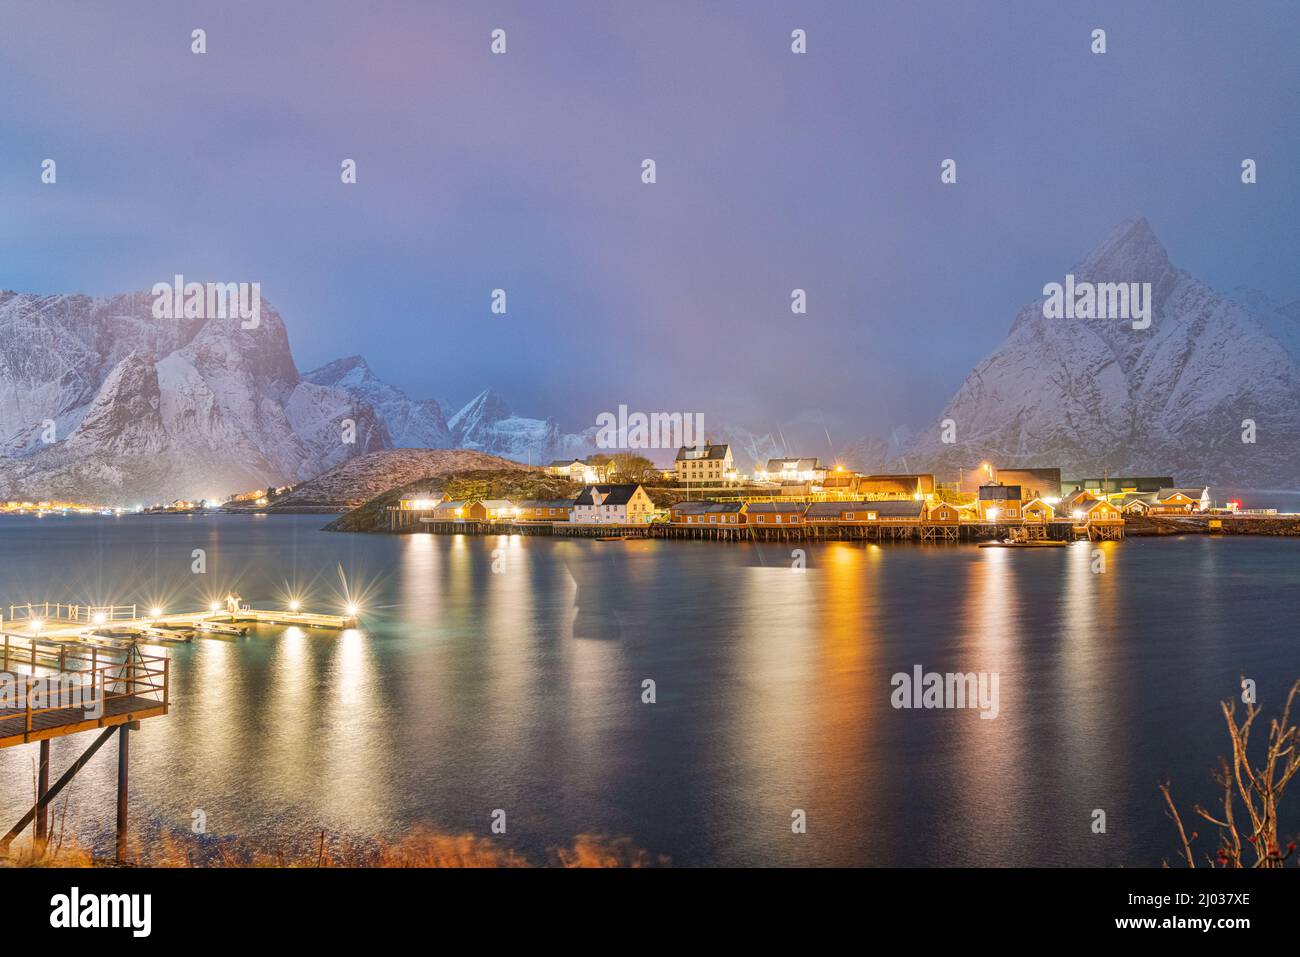 Illuminated Rorbu and houses in night fog during the cold winter, Sakrisoy, Reine, Nordland county, Lofoten Islands, Norway, Scandinavia, Europe Stock Photo